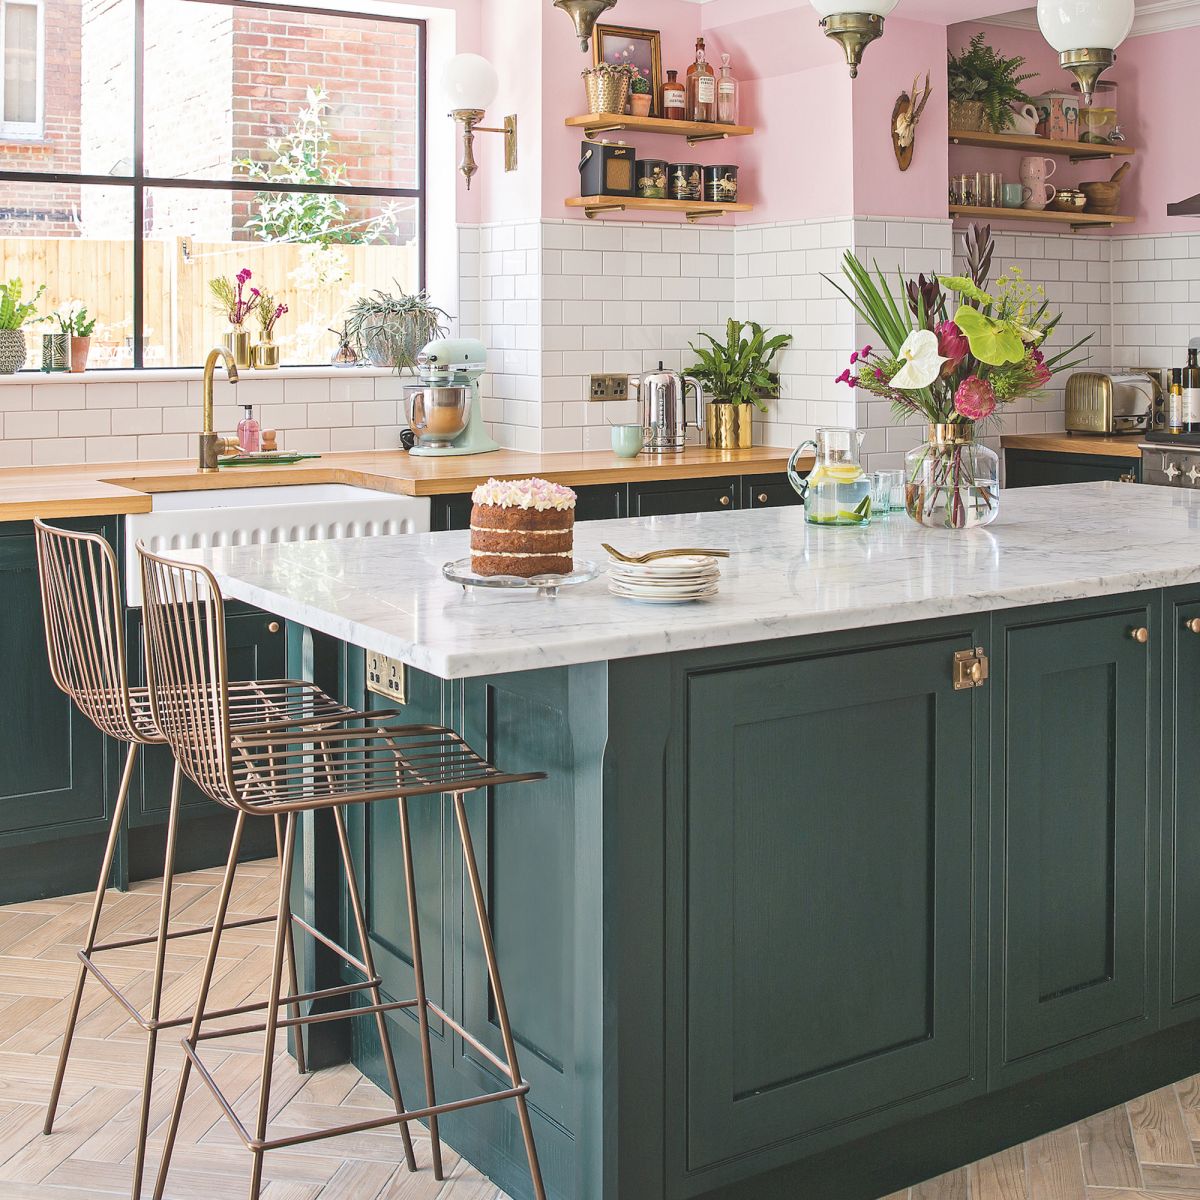 Is it OK to have a kitchen island without seating